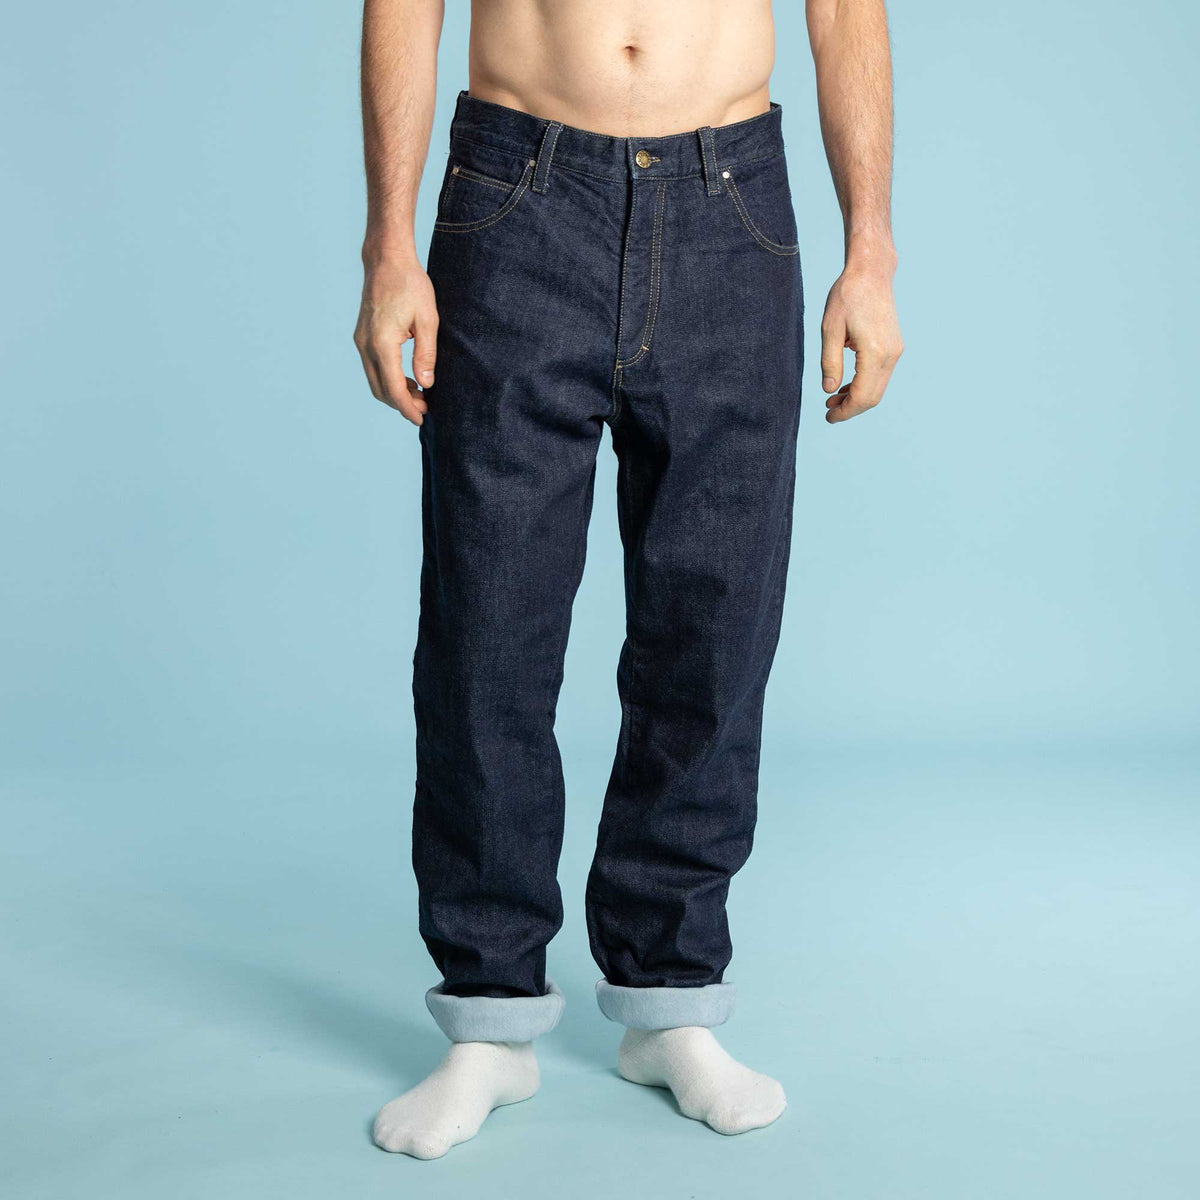 Fleece-Lined Organic Cotton Jeans (Discontinued)